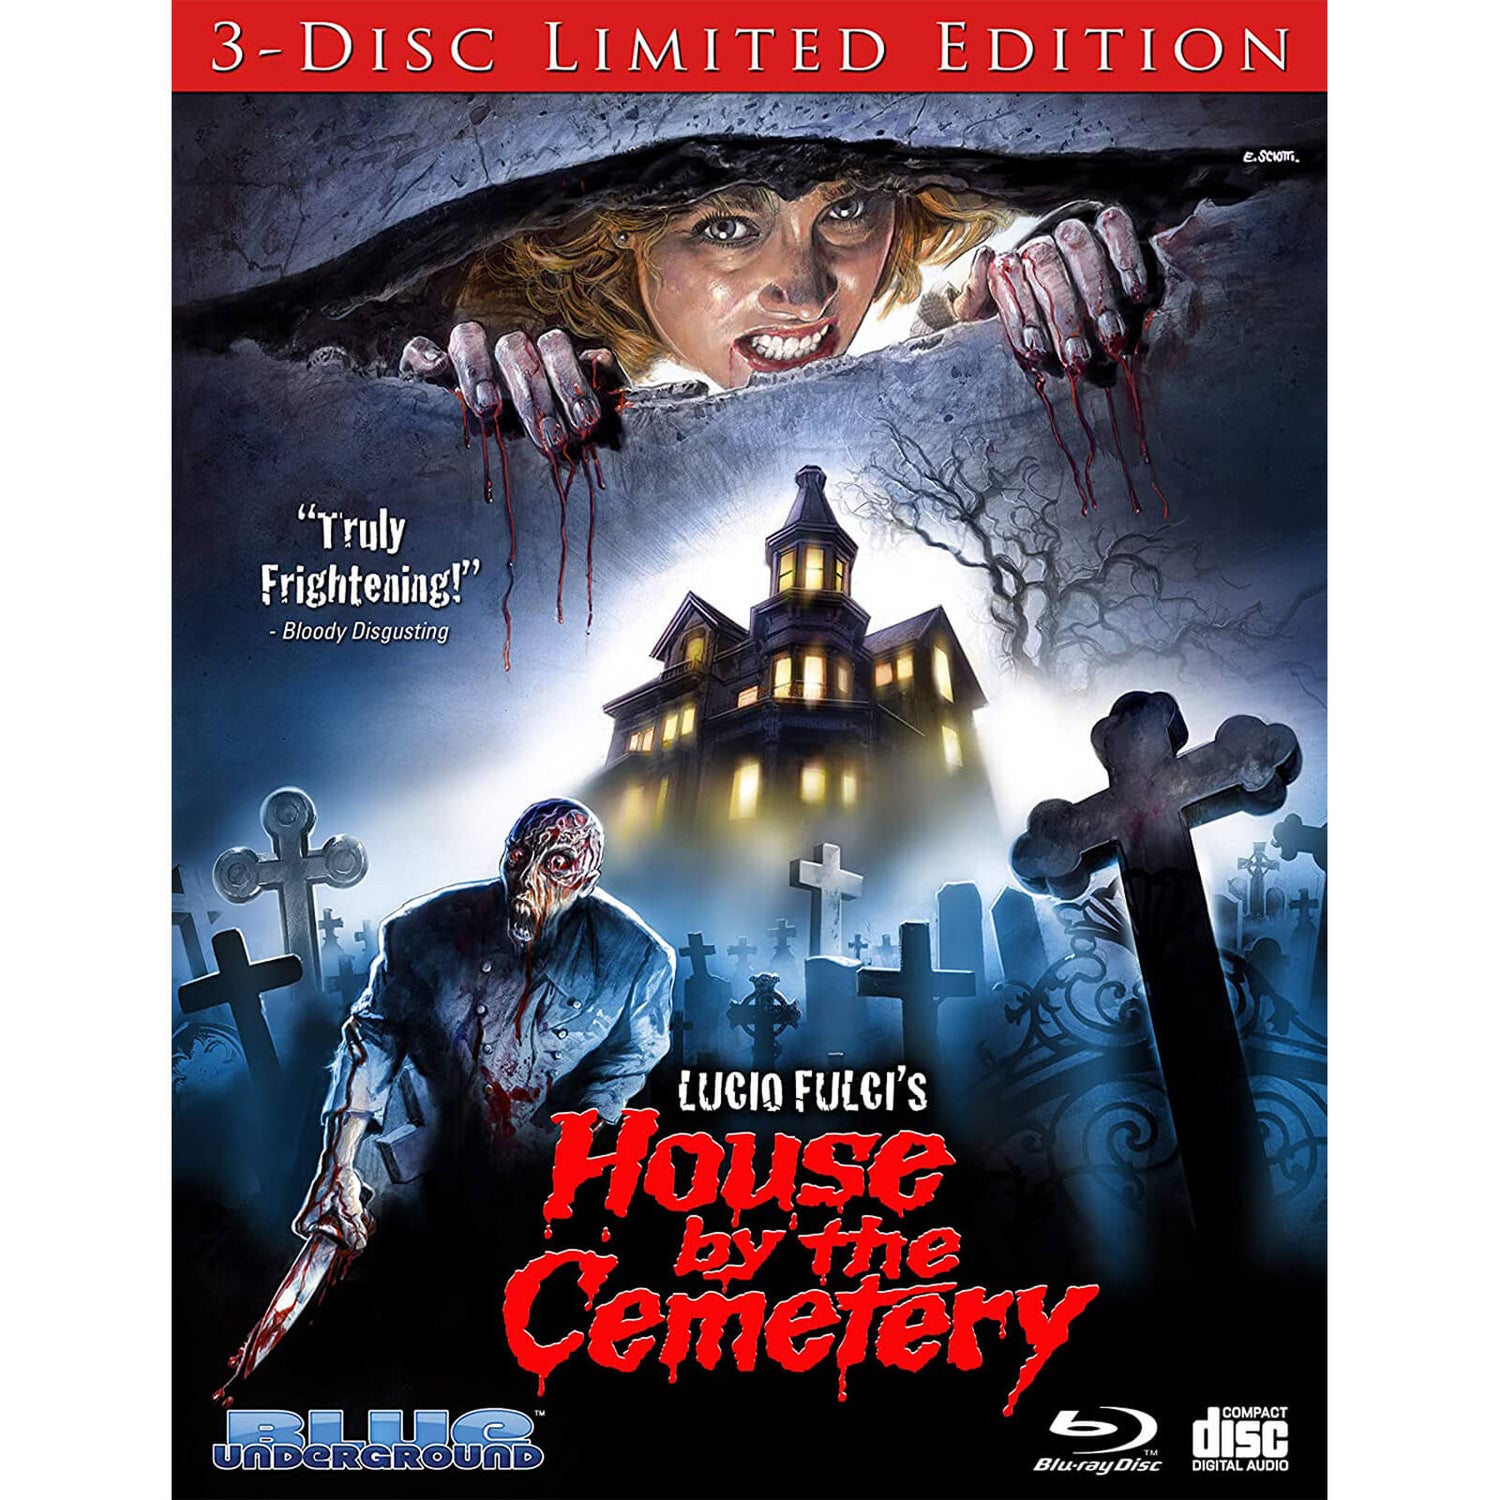 The House By The Cemetery: 3-Disc Limited Edition (Includes CD)